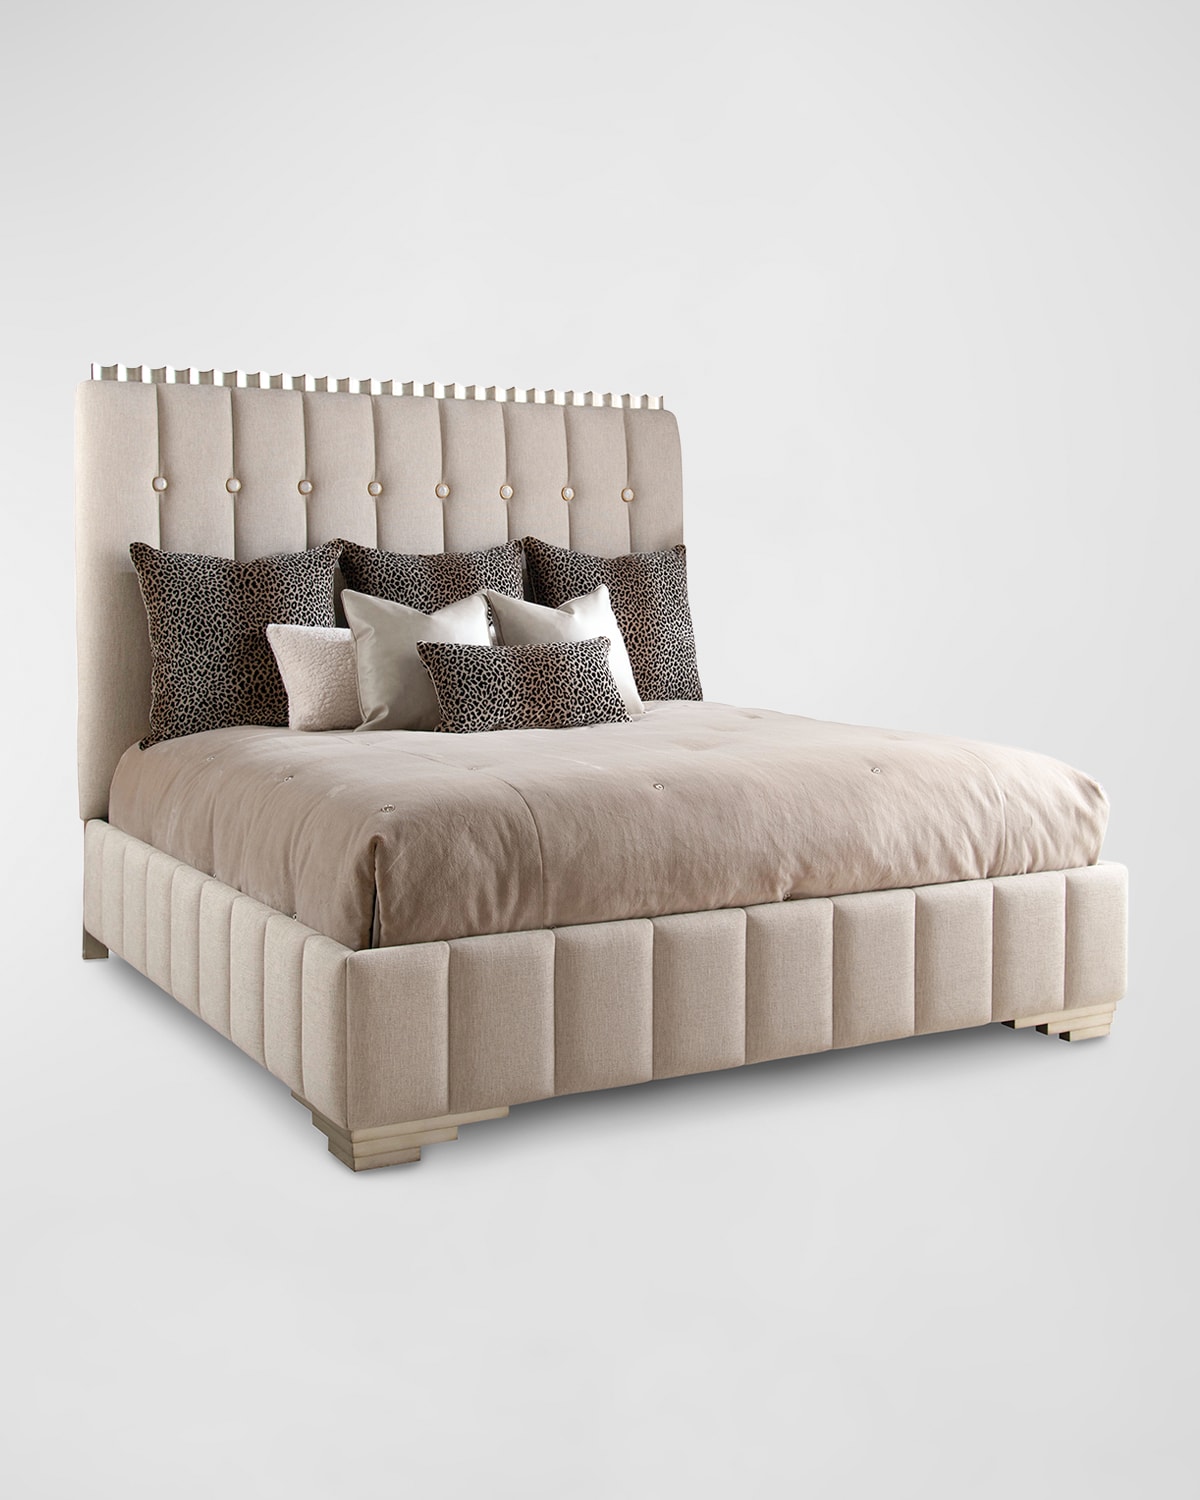 John-richard Collection Horizon Silver King Bed In Silver, Taupe